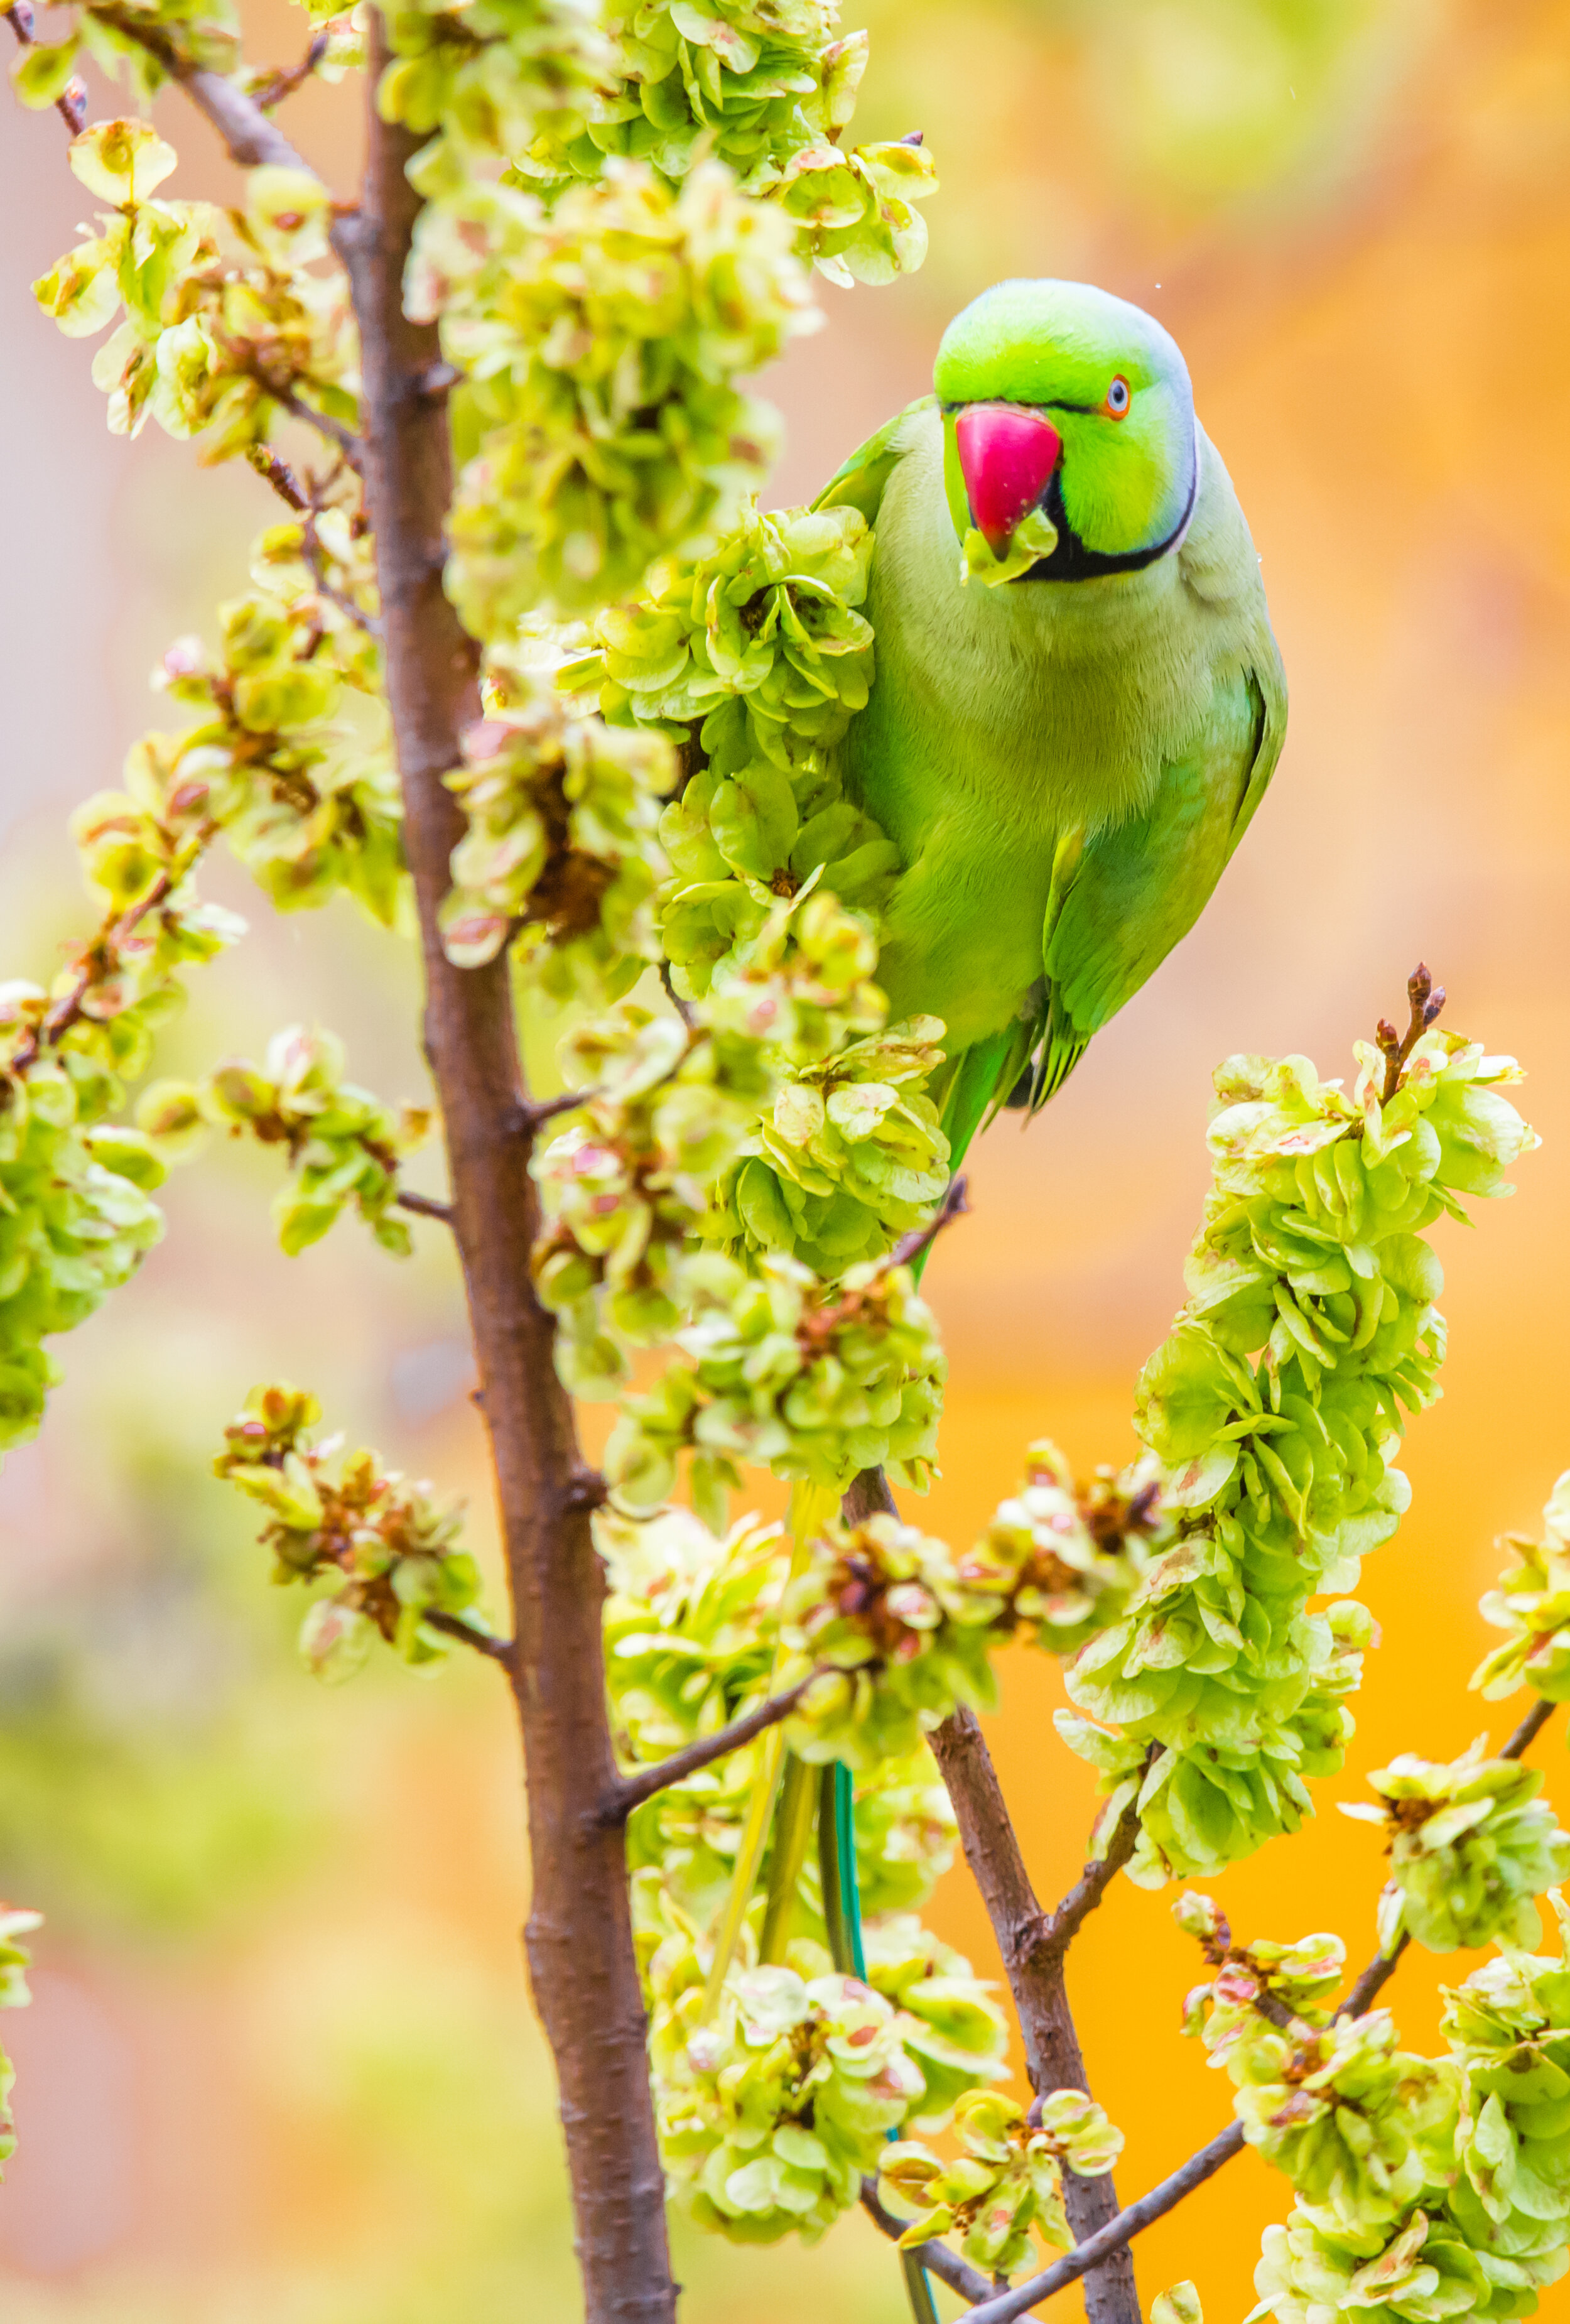 The Indian ring-necked parakeet